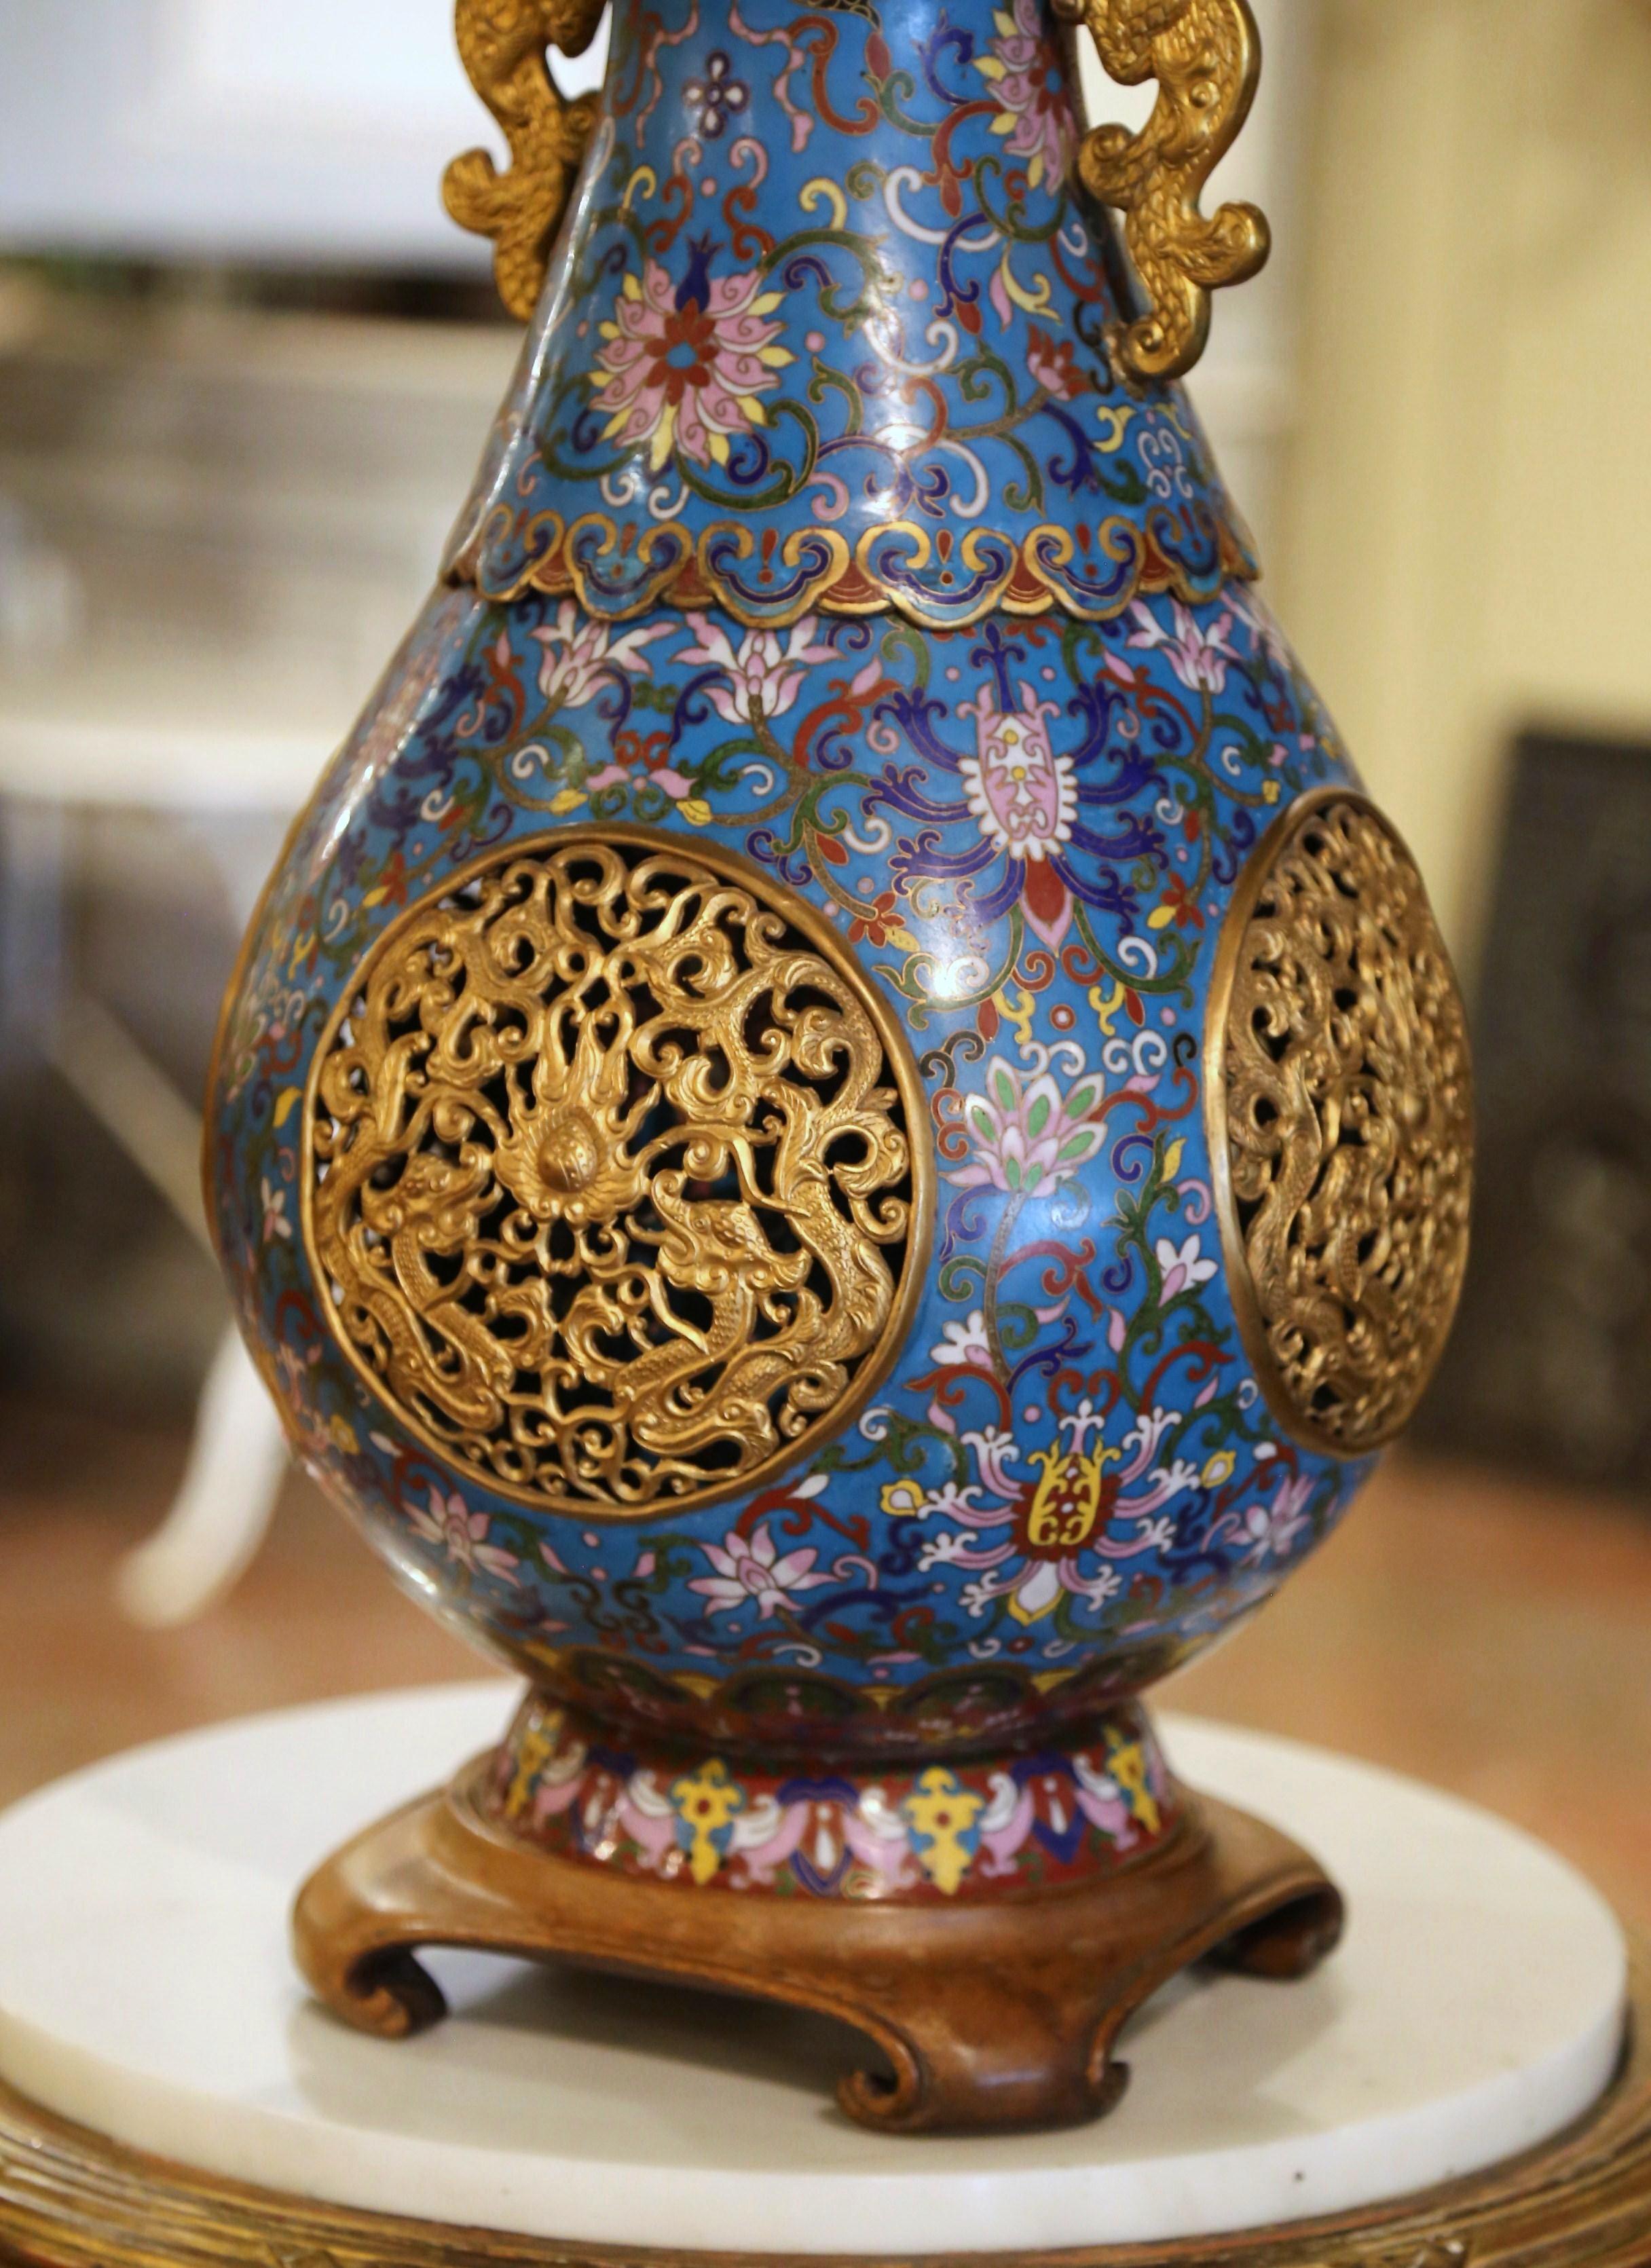 19th Century Chinese Cloisonne Enamel Reticulated Vase on Stand In Excellent Condition For Sale In Dallas, TX